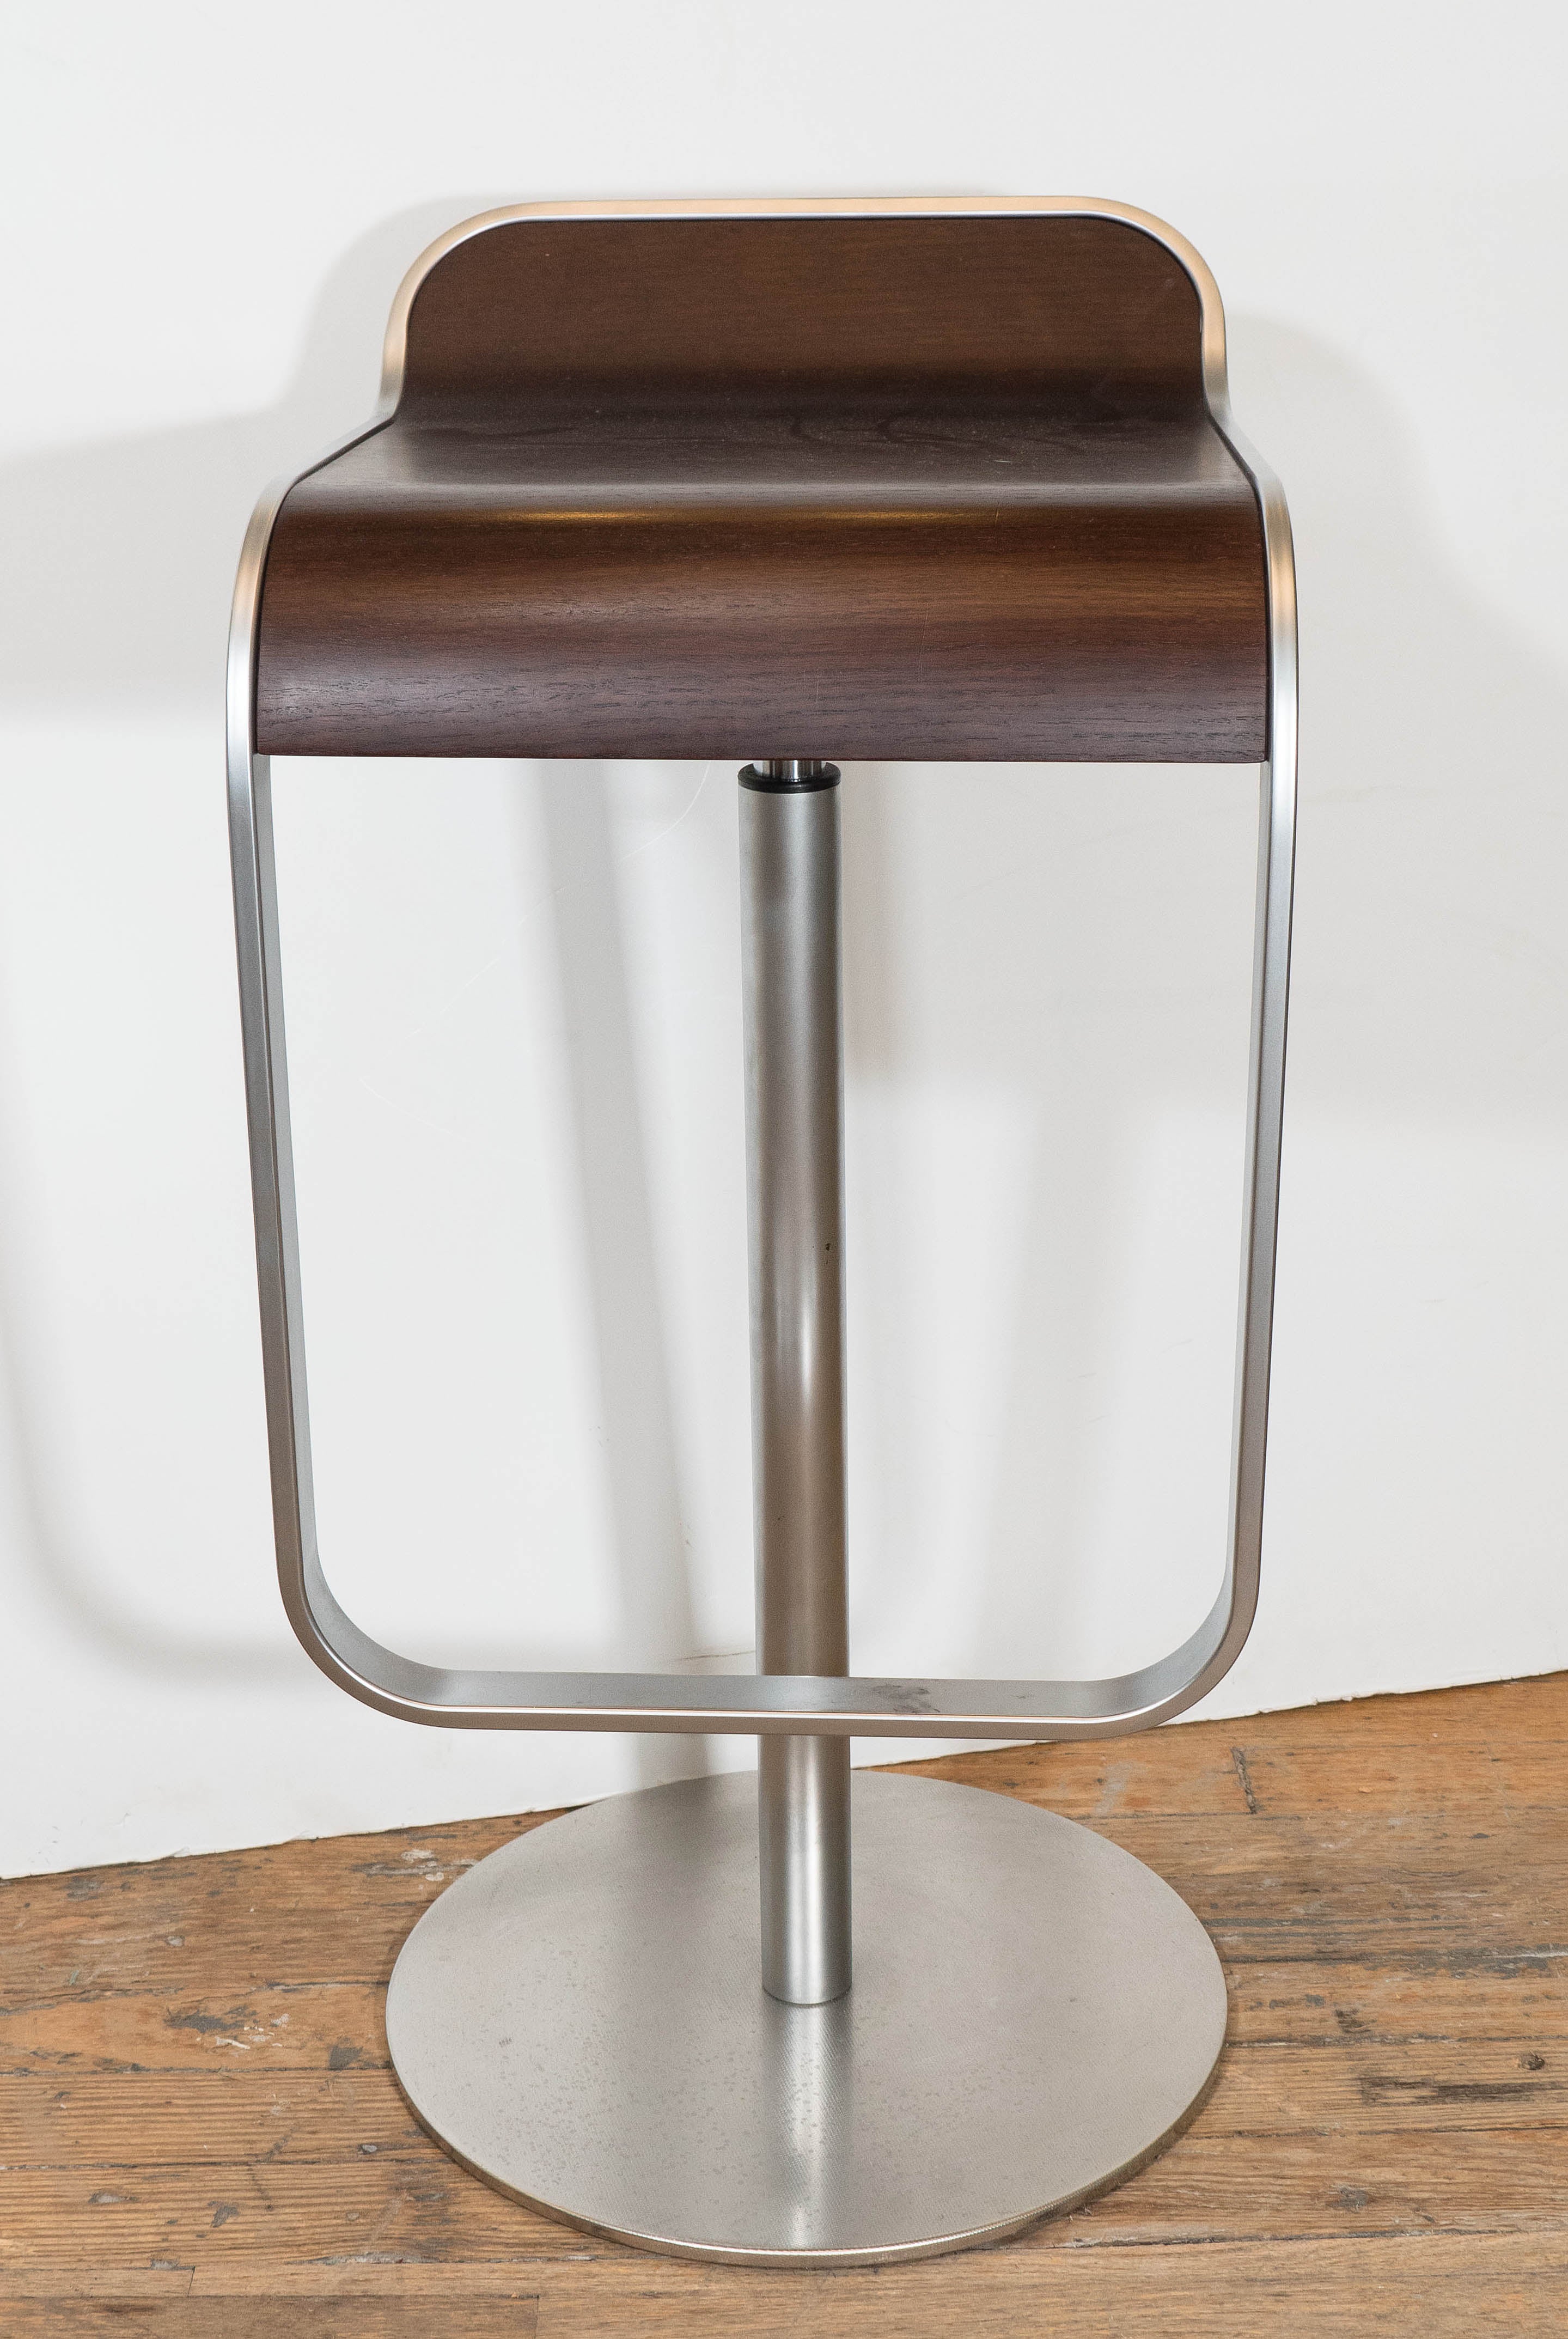 Manufactured in Italy, based on the original designs by Shin & Tomoko Azumi for La Palma, this pair of Lem Piston Barstools feature curved walnut and brushed chrome base and frame, with an adjustable height. Very good condition, consistent with age